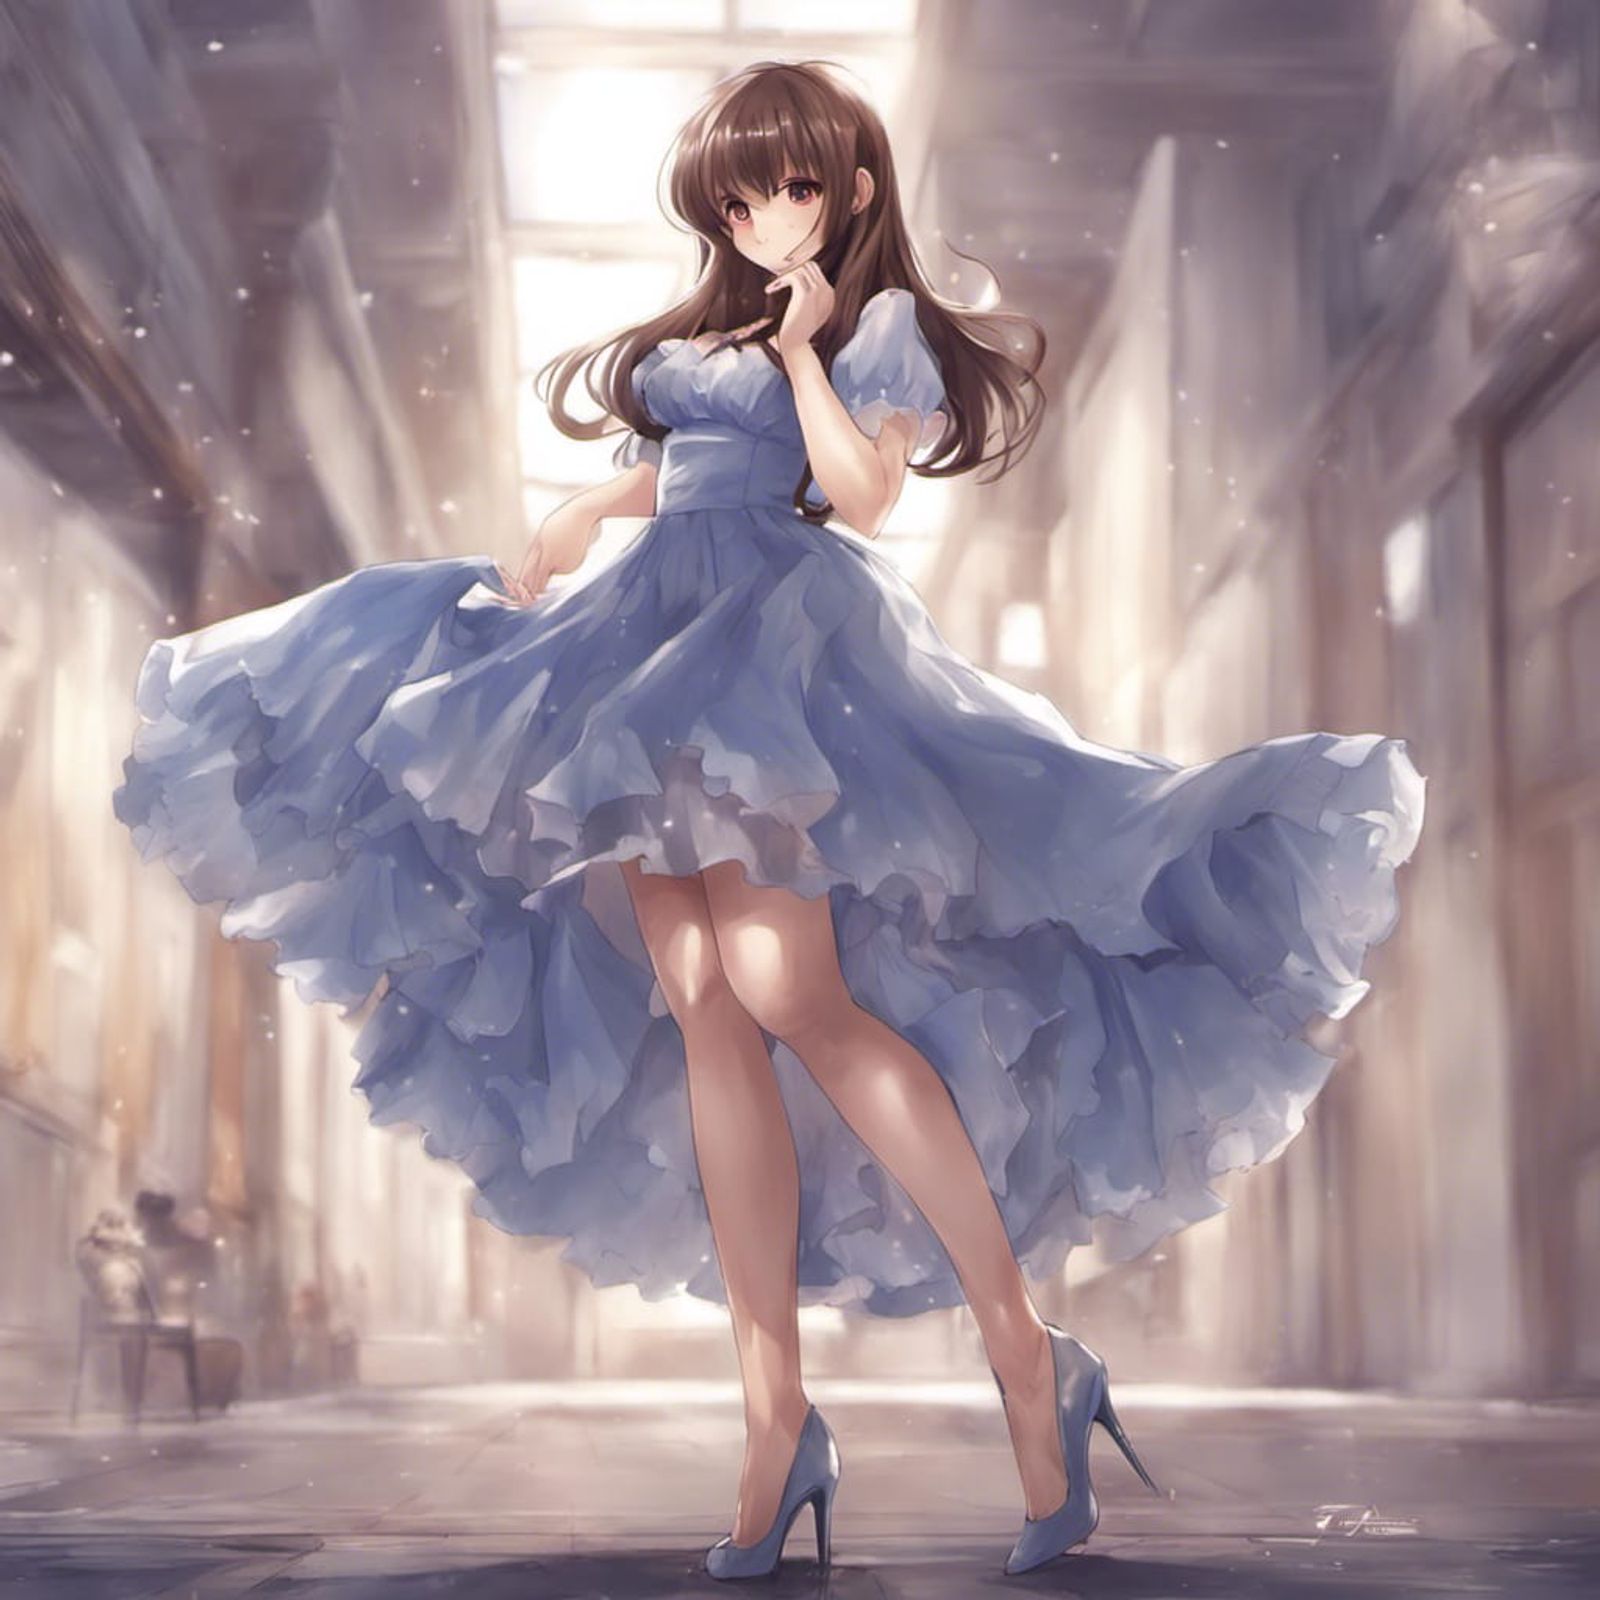 anime girl in a dress with brown hair